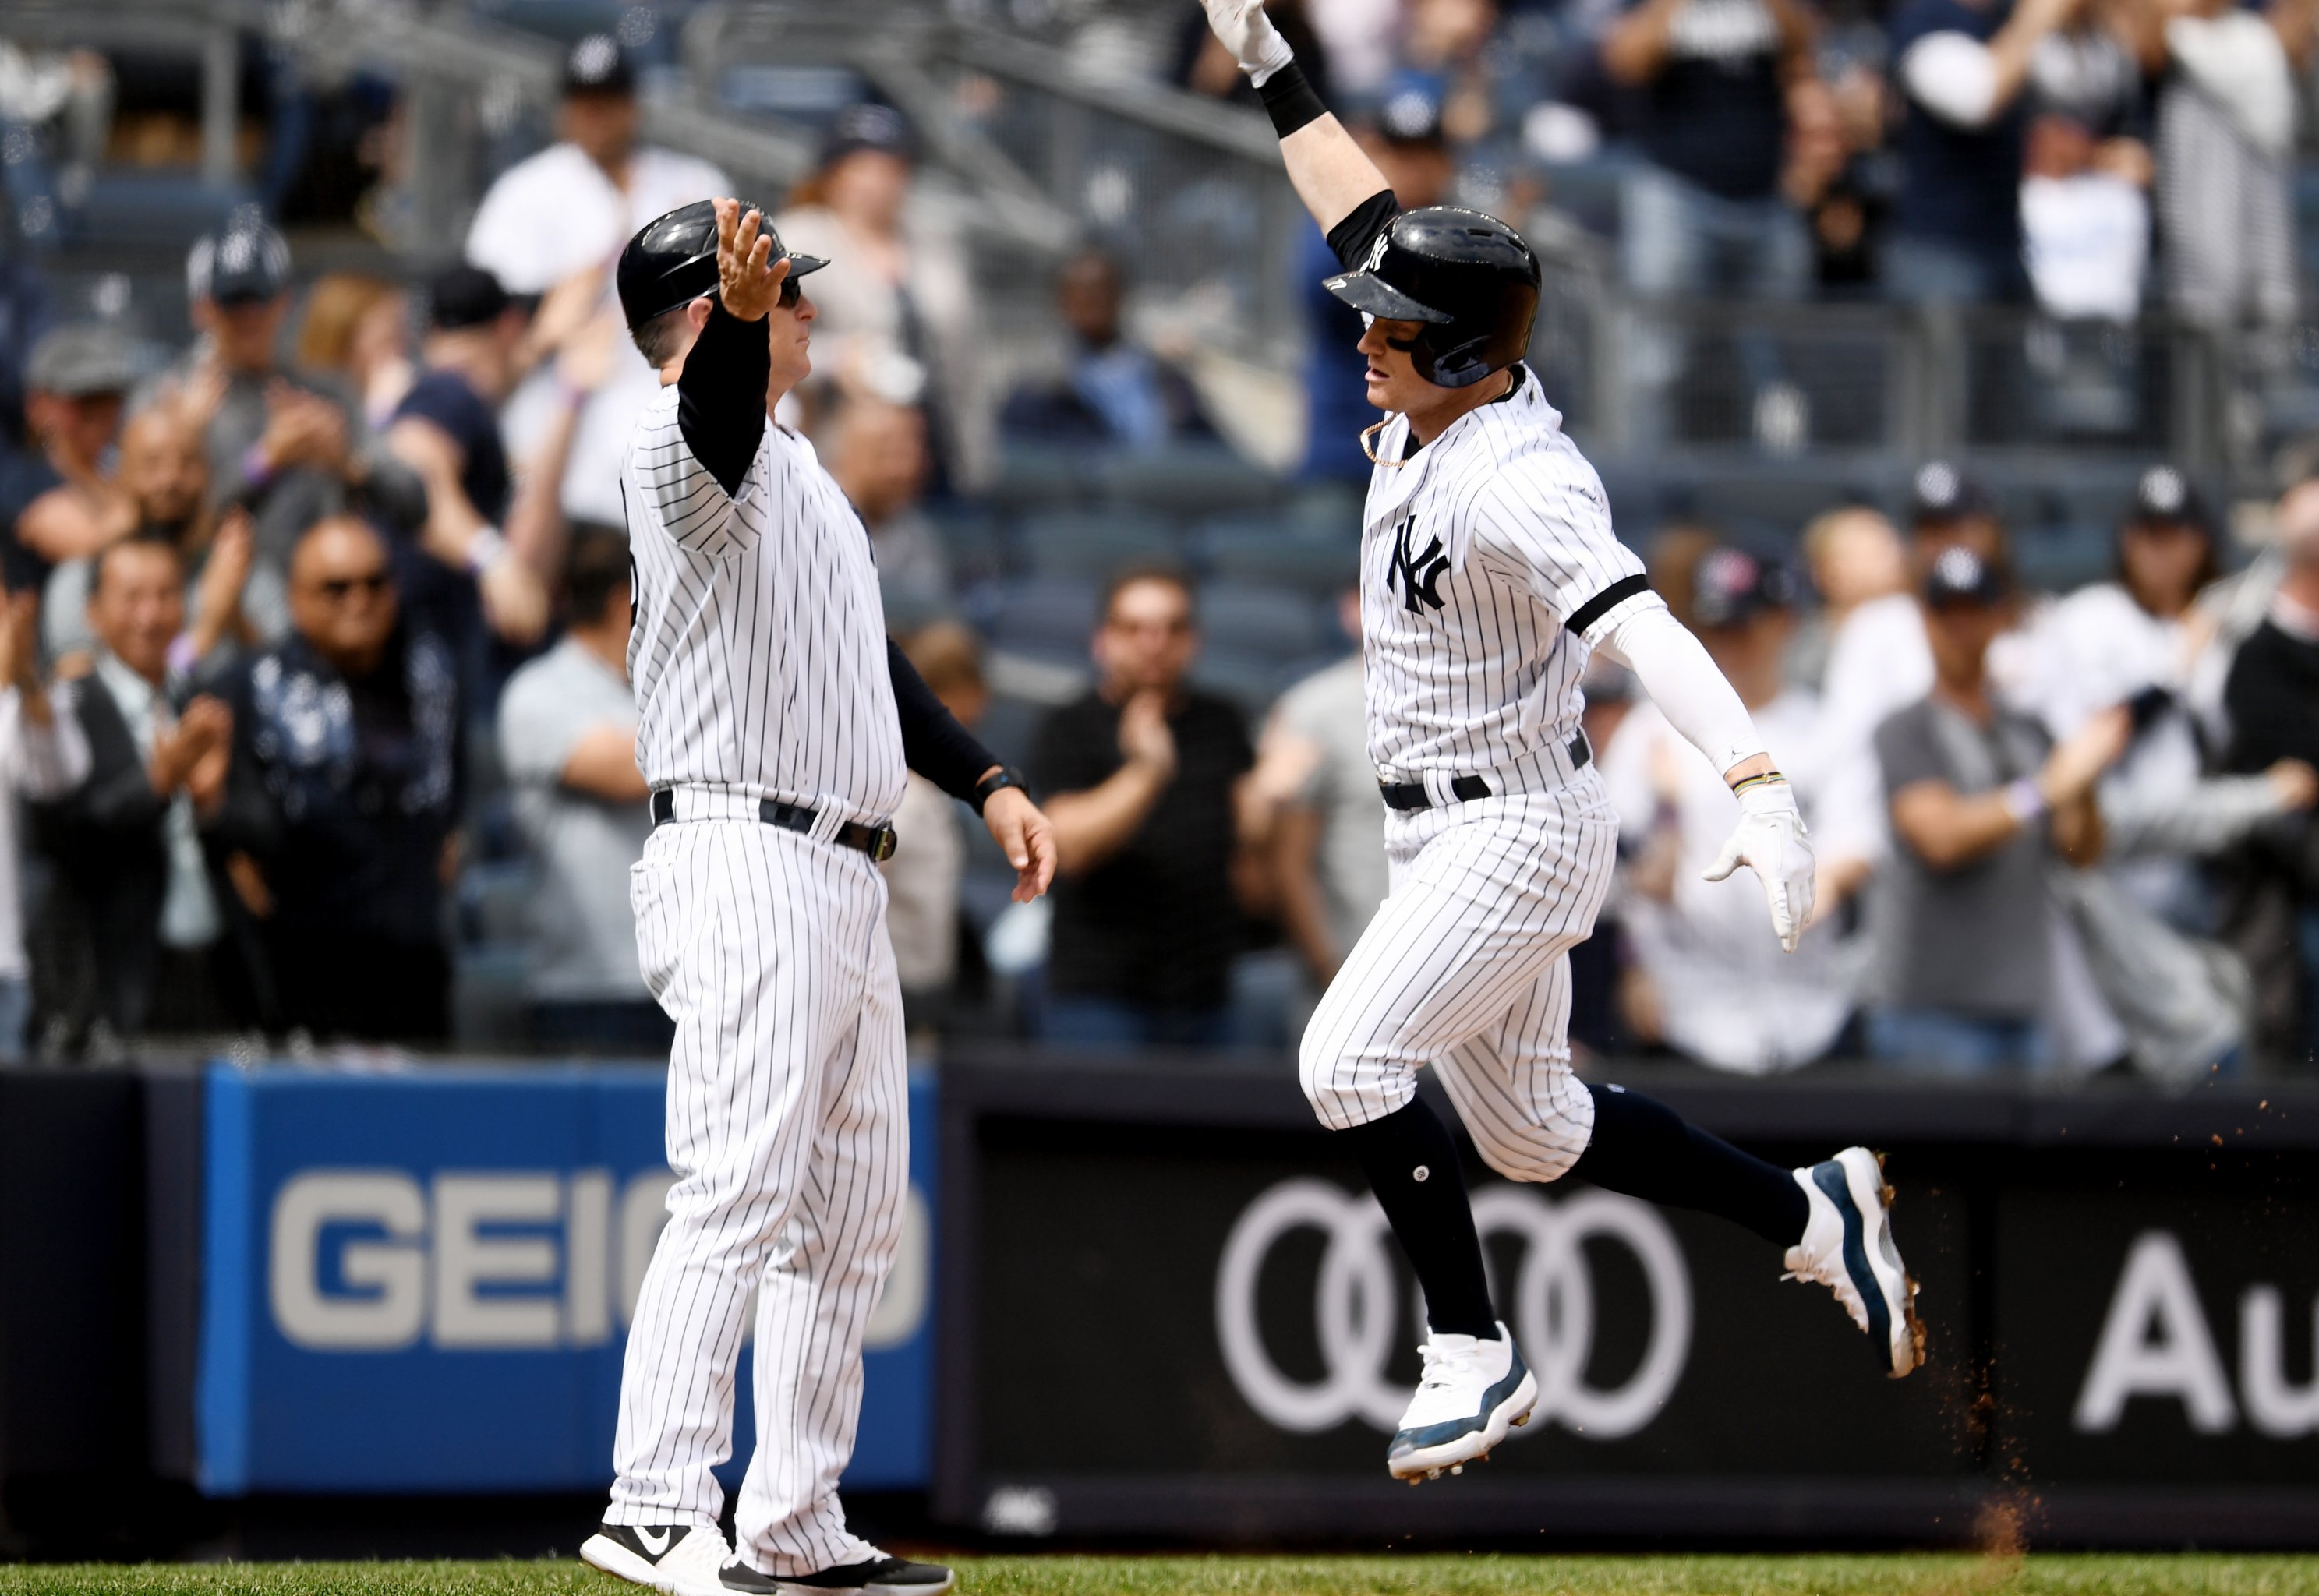 Yankees Get Some Zest, Courtesy of Frazier and Frazier - The New